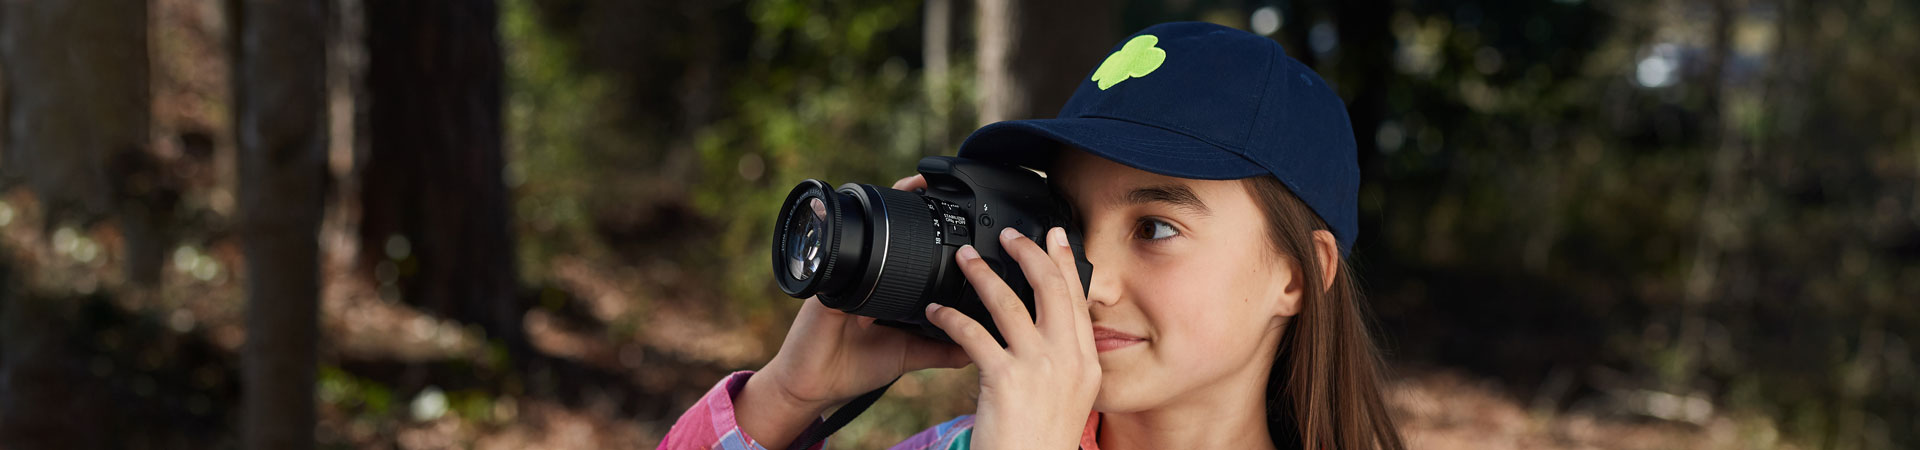  A Girl Scout wearing a blue baseball cap with a lime-green trefoil is standing outdoors looking through the viewfinder of a camera.  